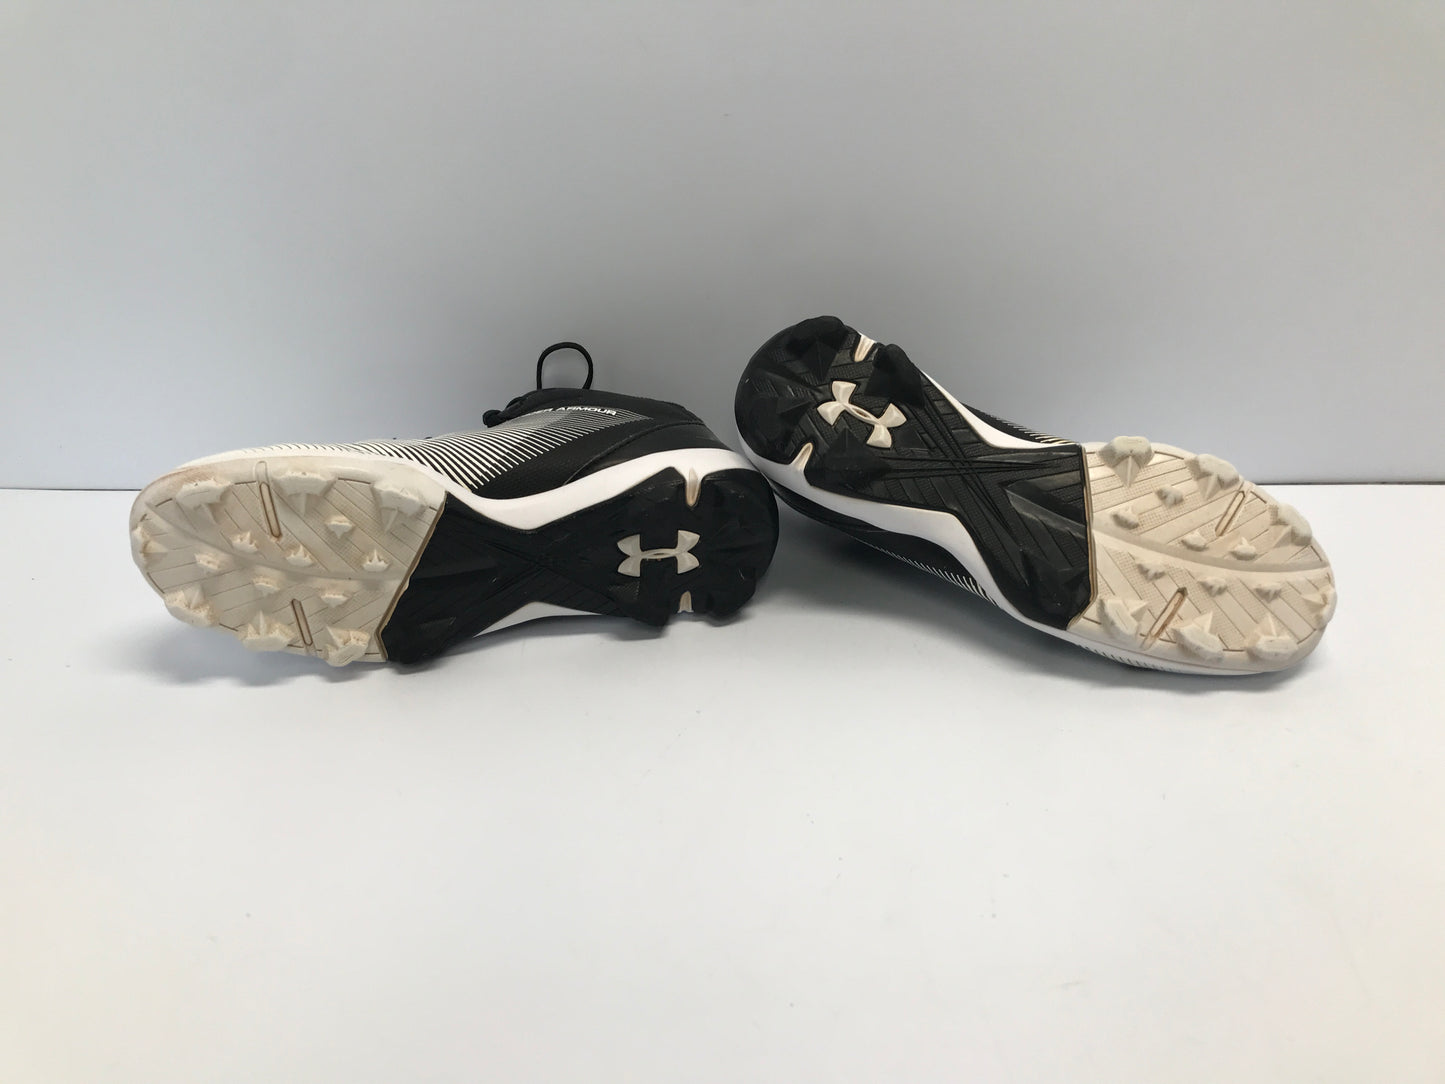 Baseball Shoes Cleats Child Size 4 Under Armour Black White High Tops